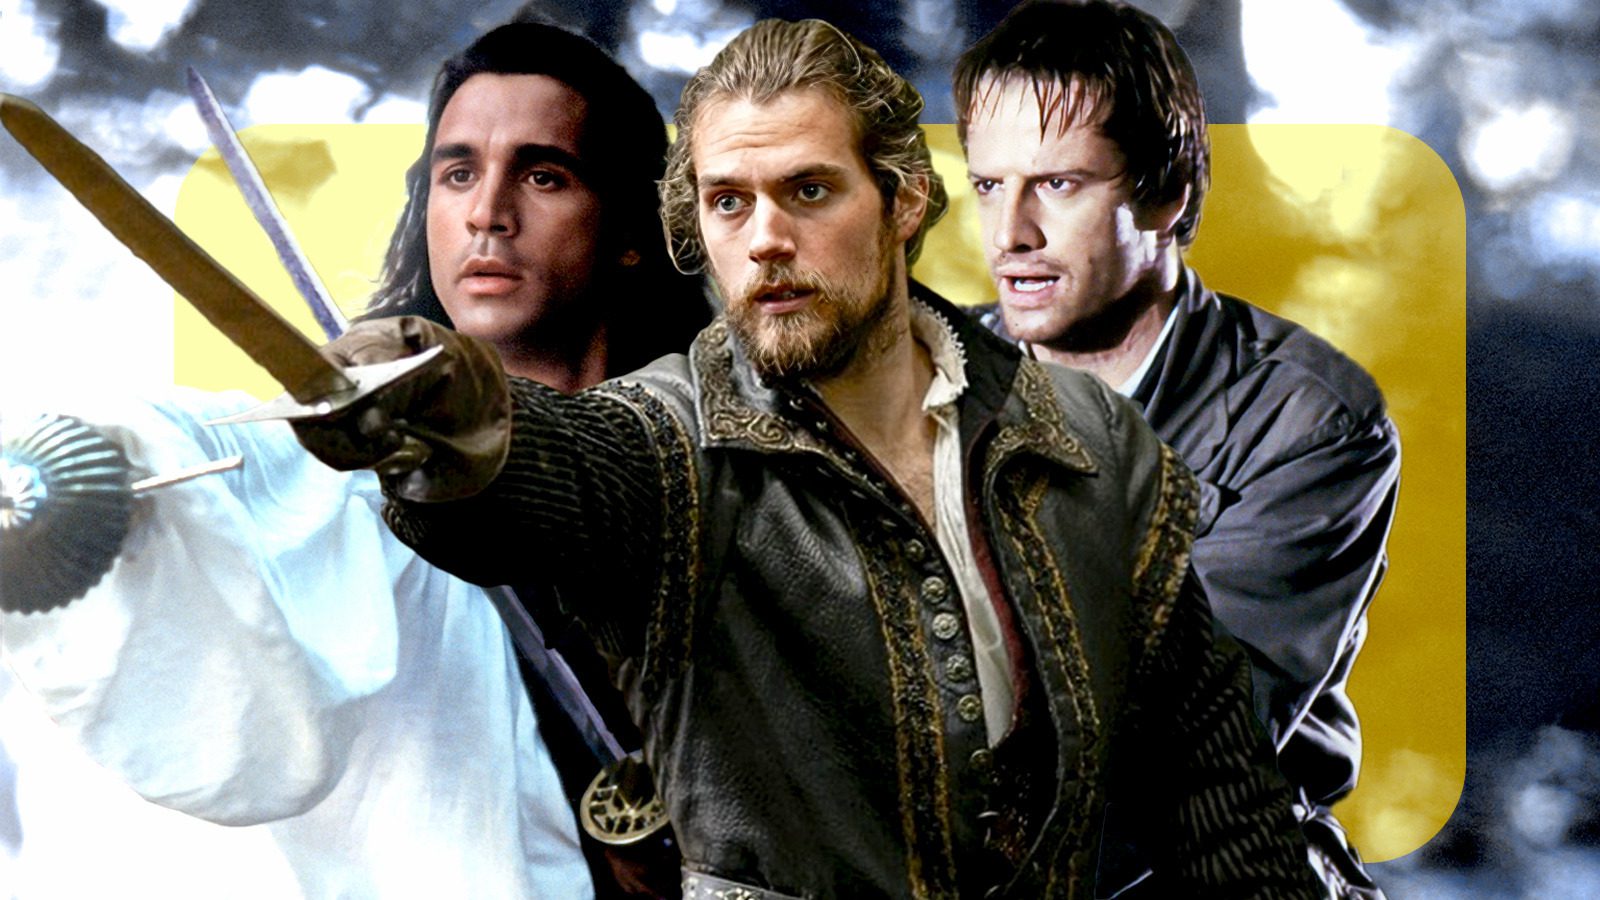 Henry Cavill's Highlander Reboot Should Ignore The Movies And Look Only To The TV Series For Inspiration